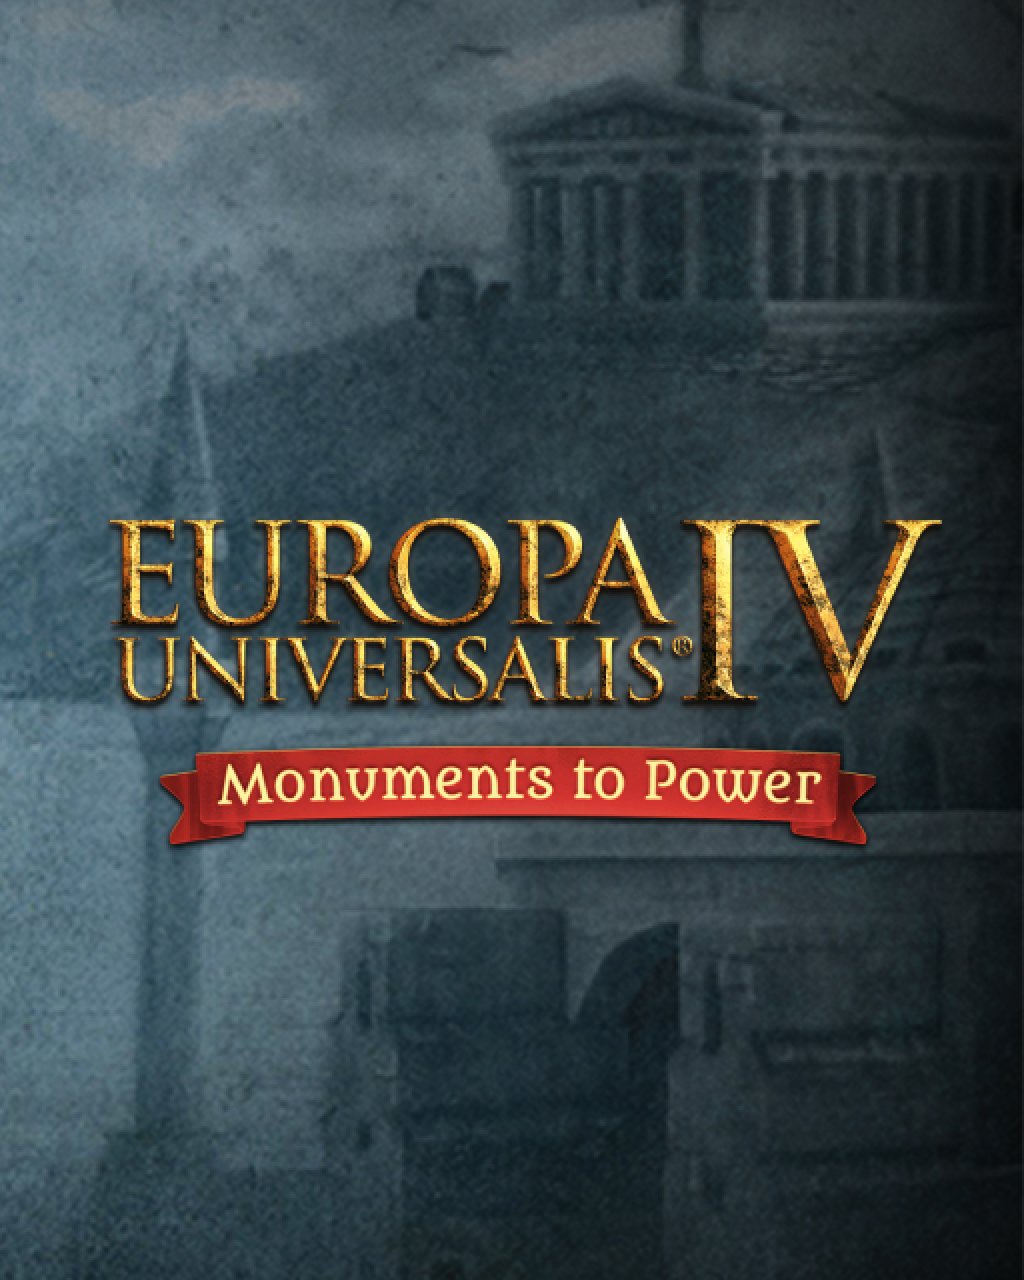 Europa Universalis IV Monuments to Power Pack